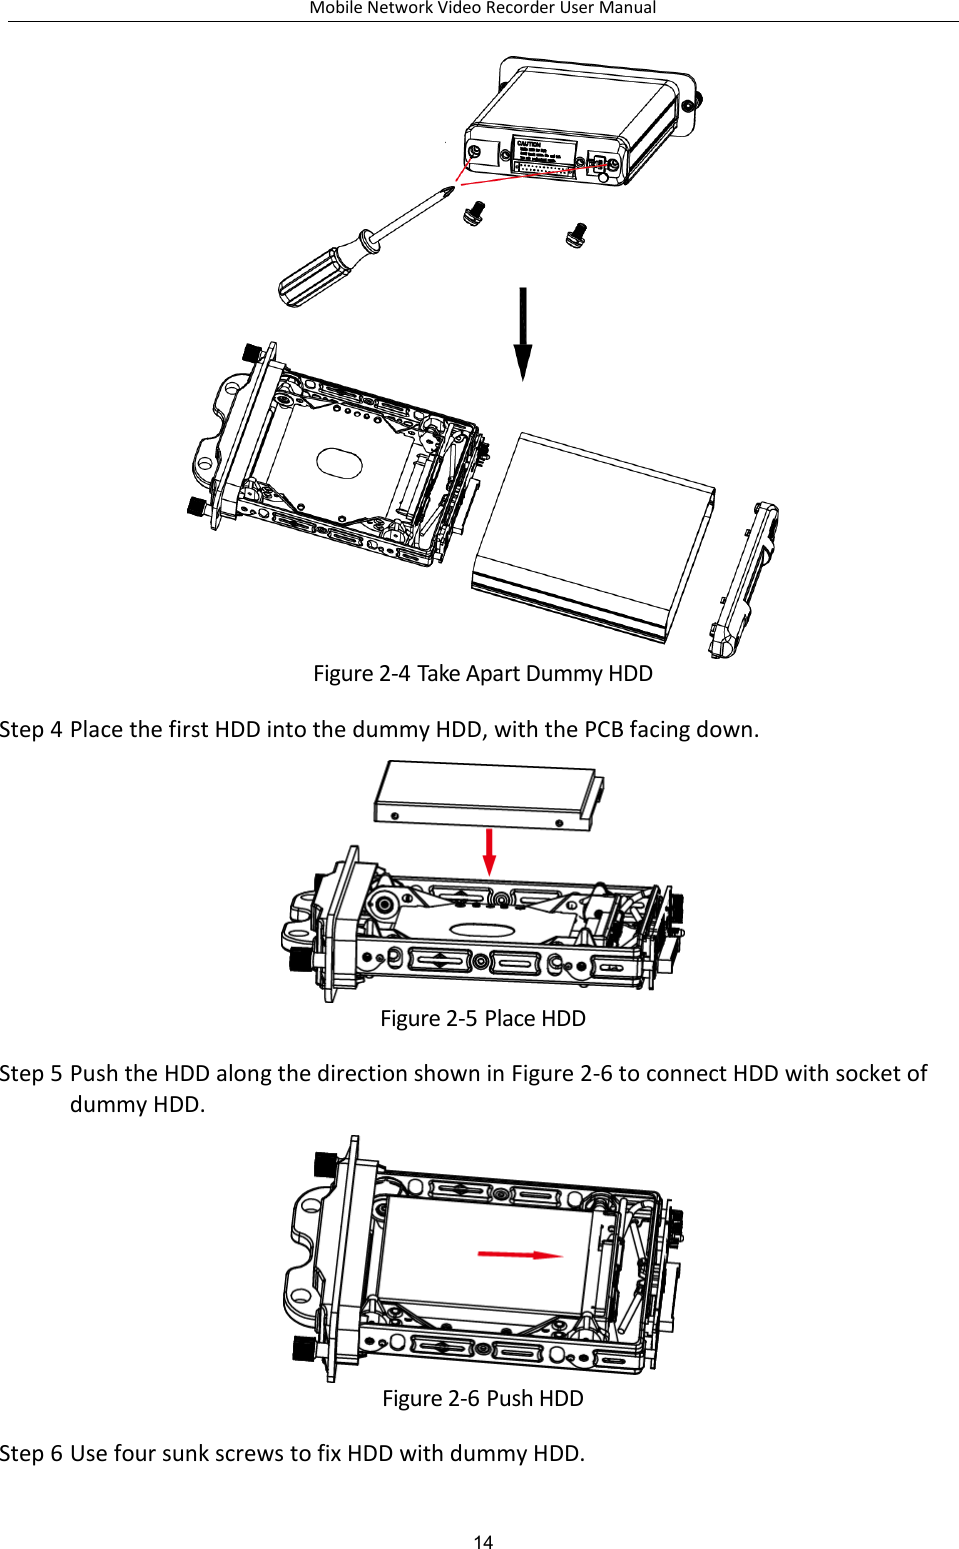 Mobile Network Video Recorder User Manual 14  Figure 2-4 Take Apart Dummy HDD Step 4 Place the first HDD into the dummy HDD, with the PCB facing down.  Figure 2-5 Place HDD Step 5 Push the HDD along the direction shown in Figure 2-6 to connect HDD with socket of dummy HDD.  Figure 2-6 Push HDD Step 6 Use four sunk screws to fix HDD with dummy HDD. 